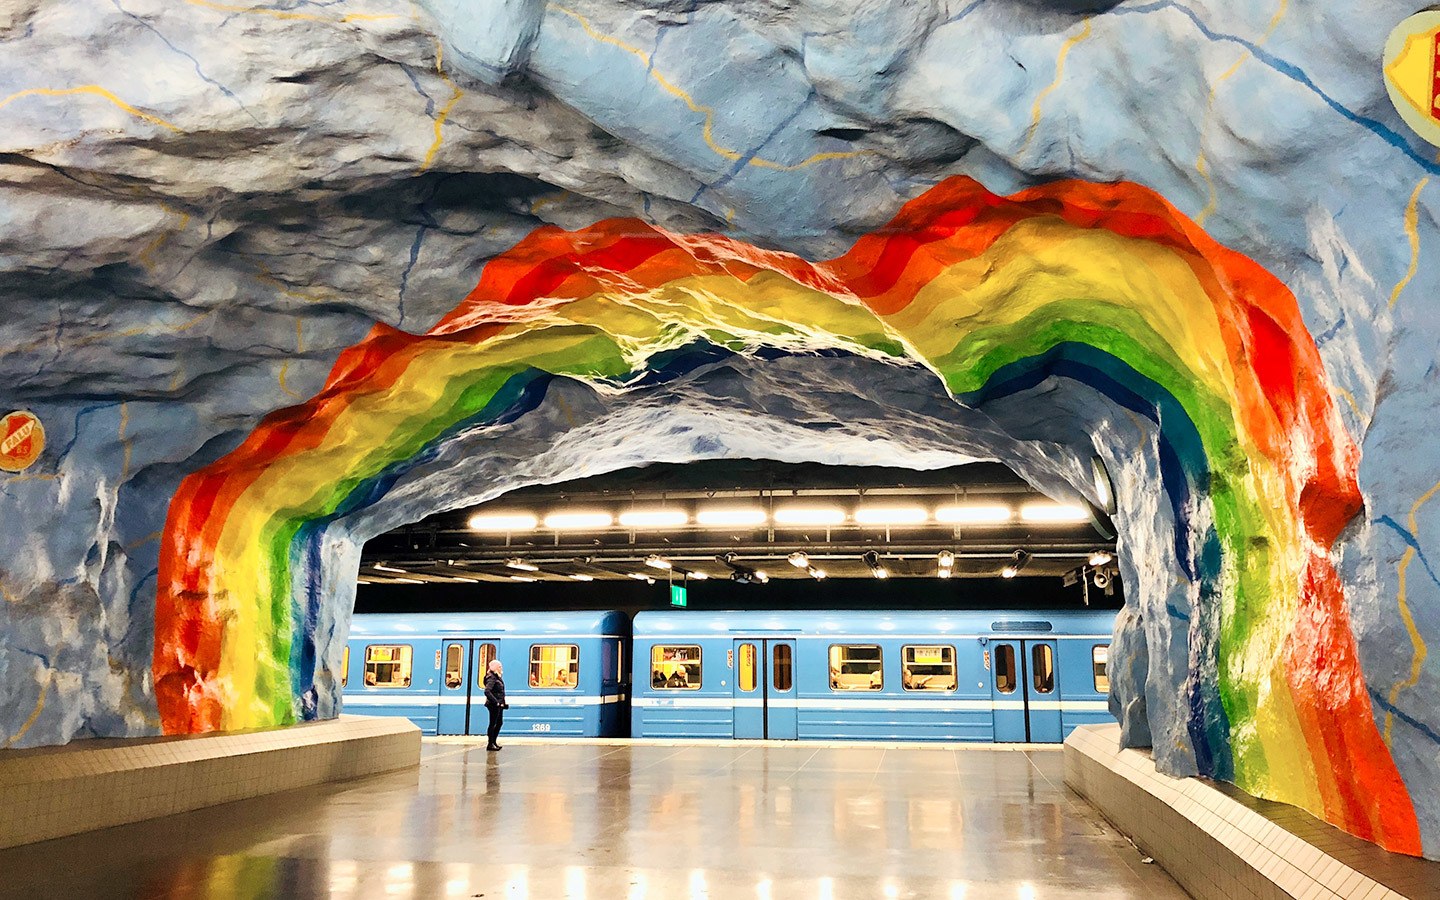 Rainbow painted walls in the Stockholm Metro, Sweden